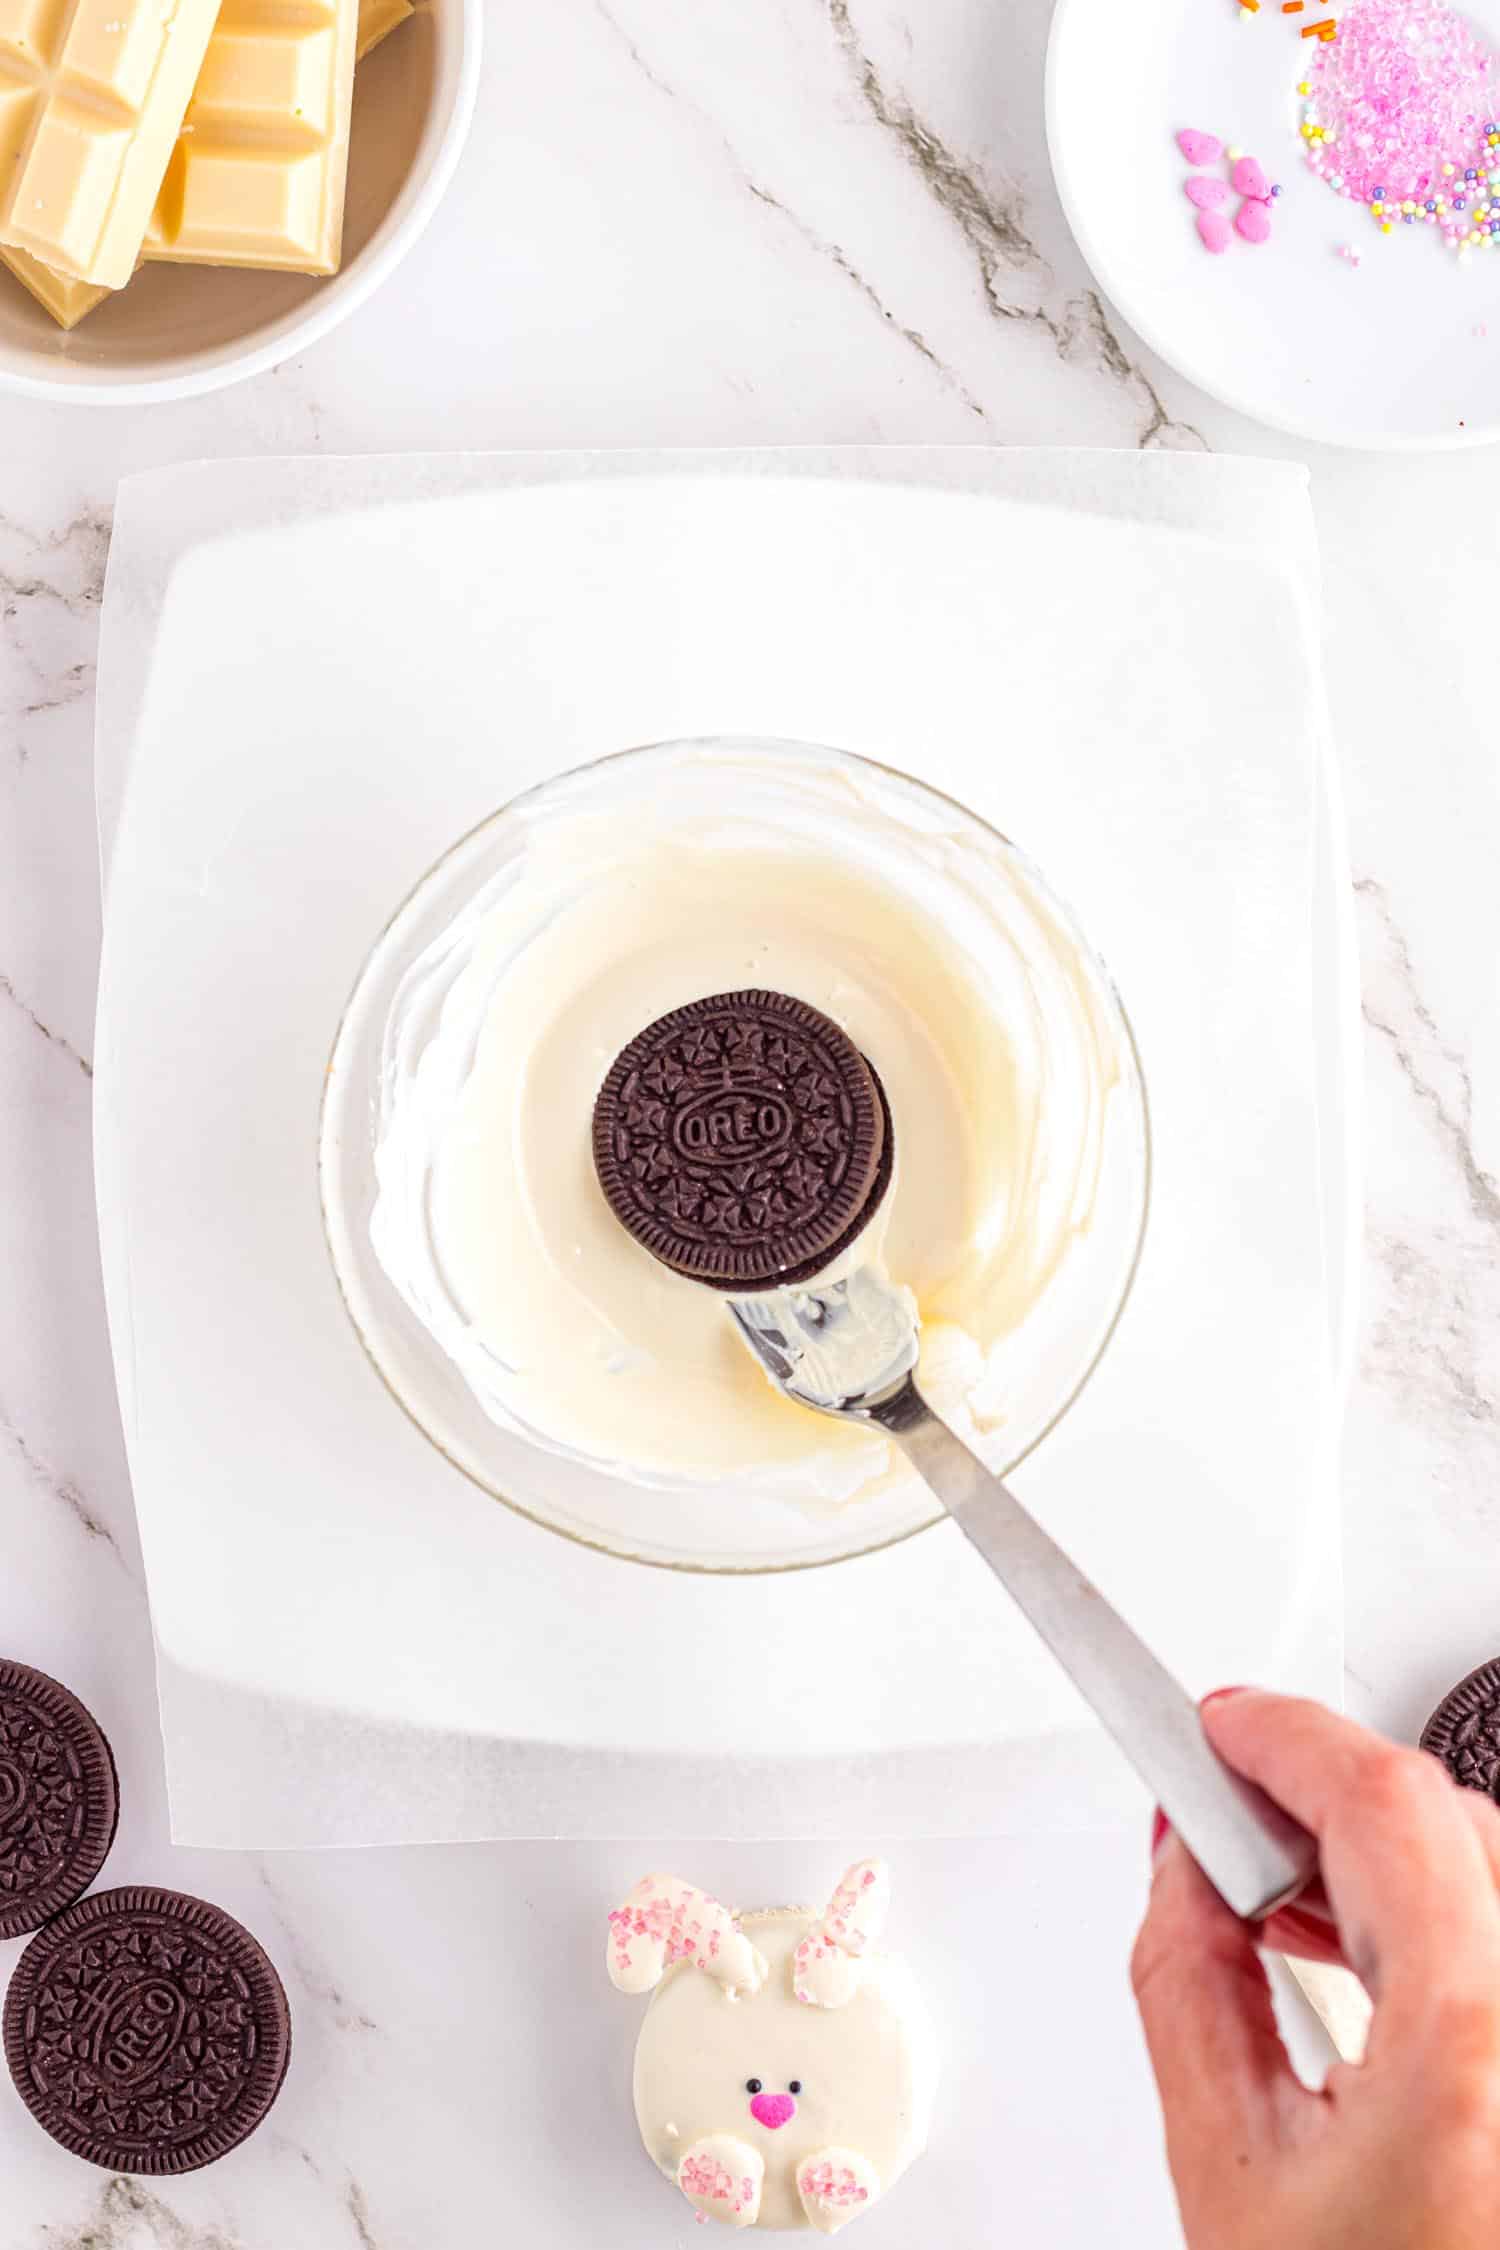 Plain Oreo cookie being lowered on fork into melted white chocolate